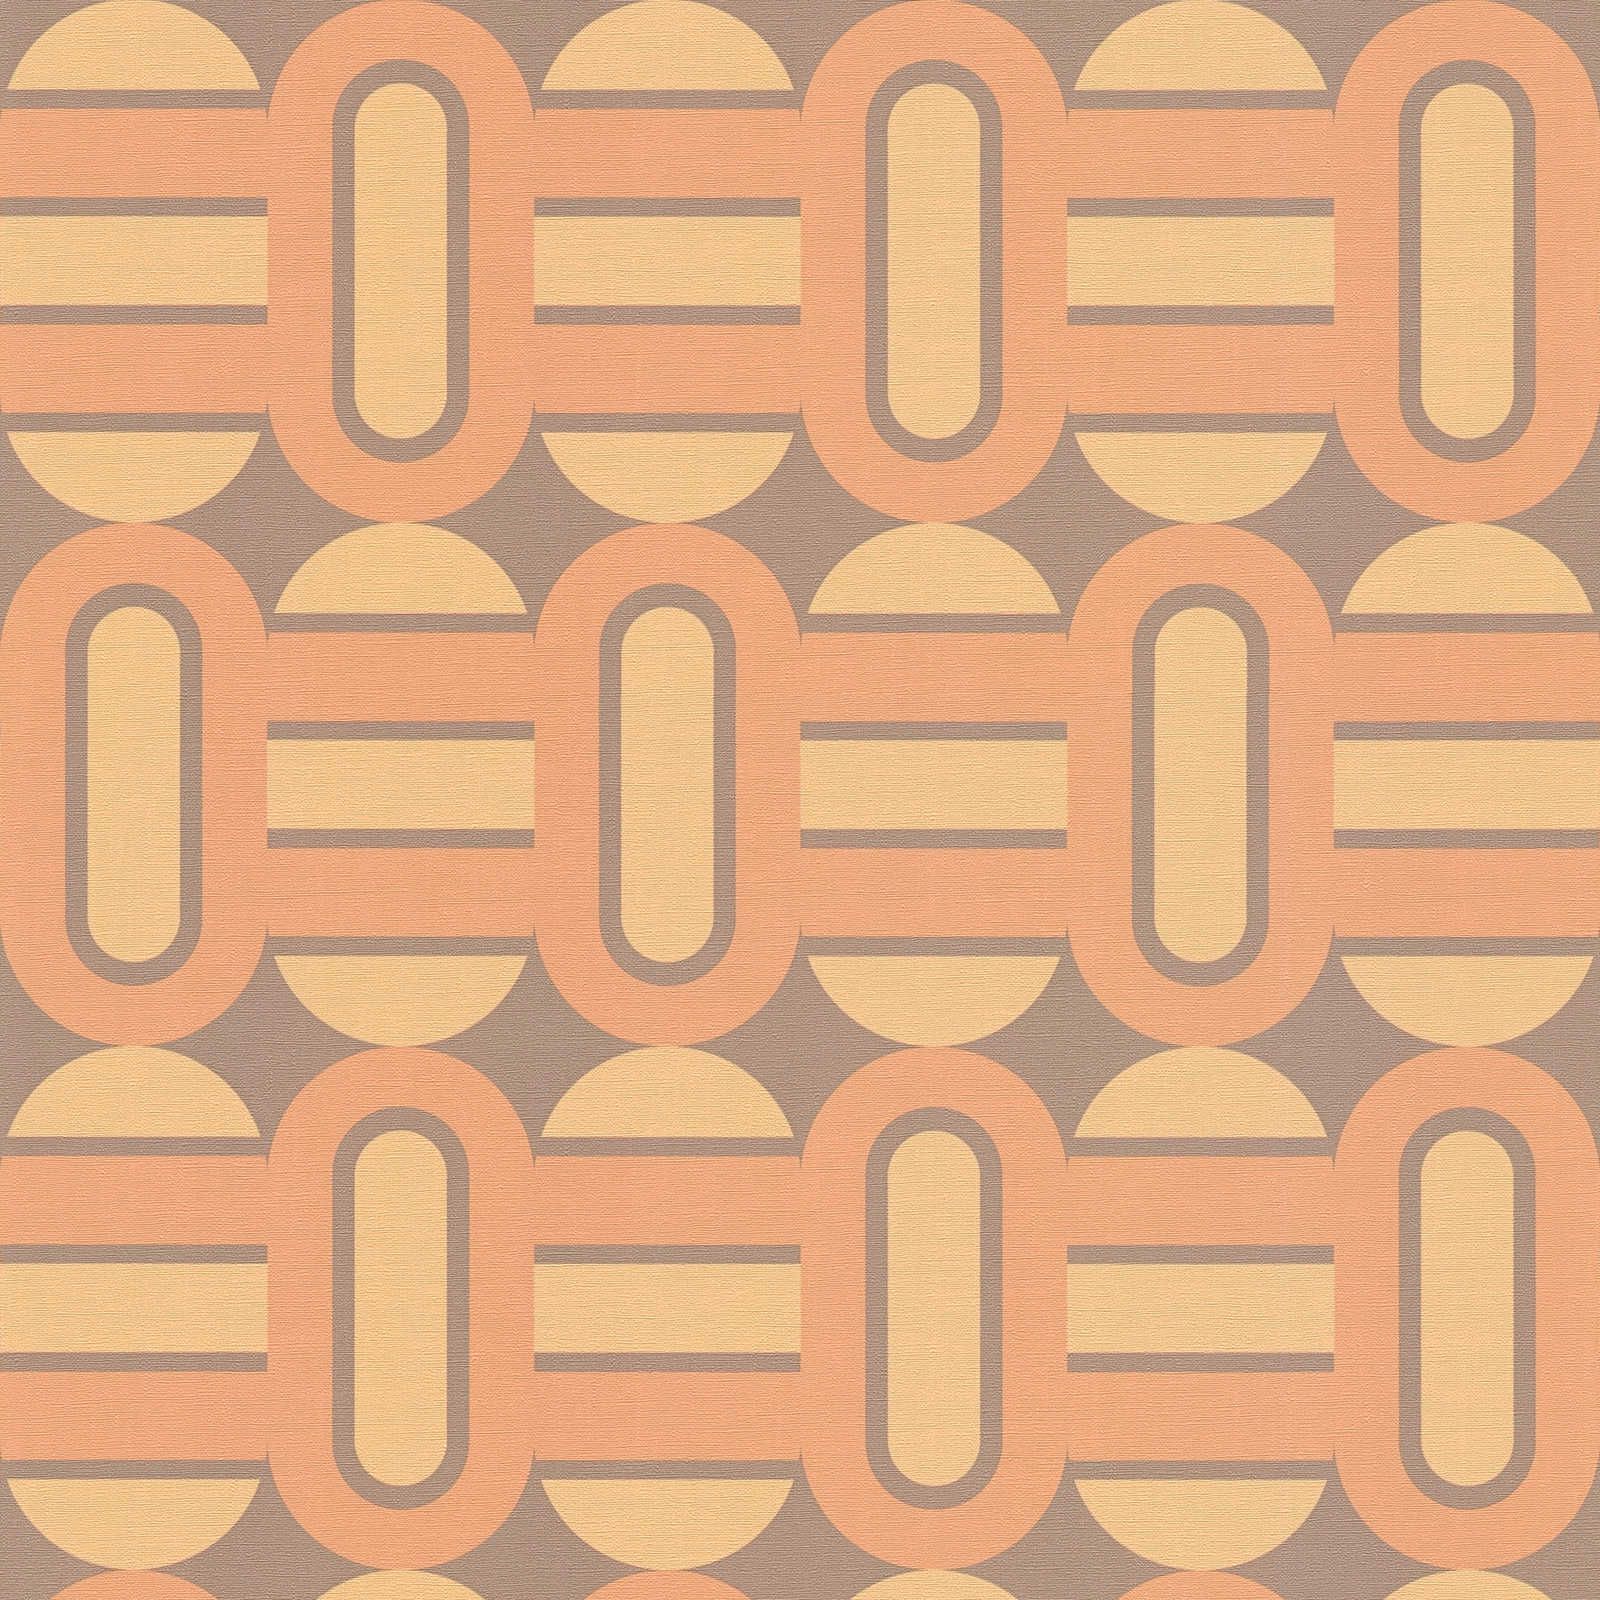         Retro non-woven wallpaper decorated with ovals and bars in warm colours - brown, yellow, orange
    